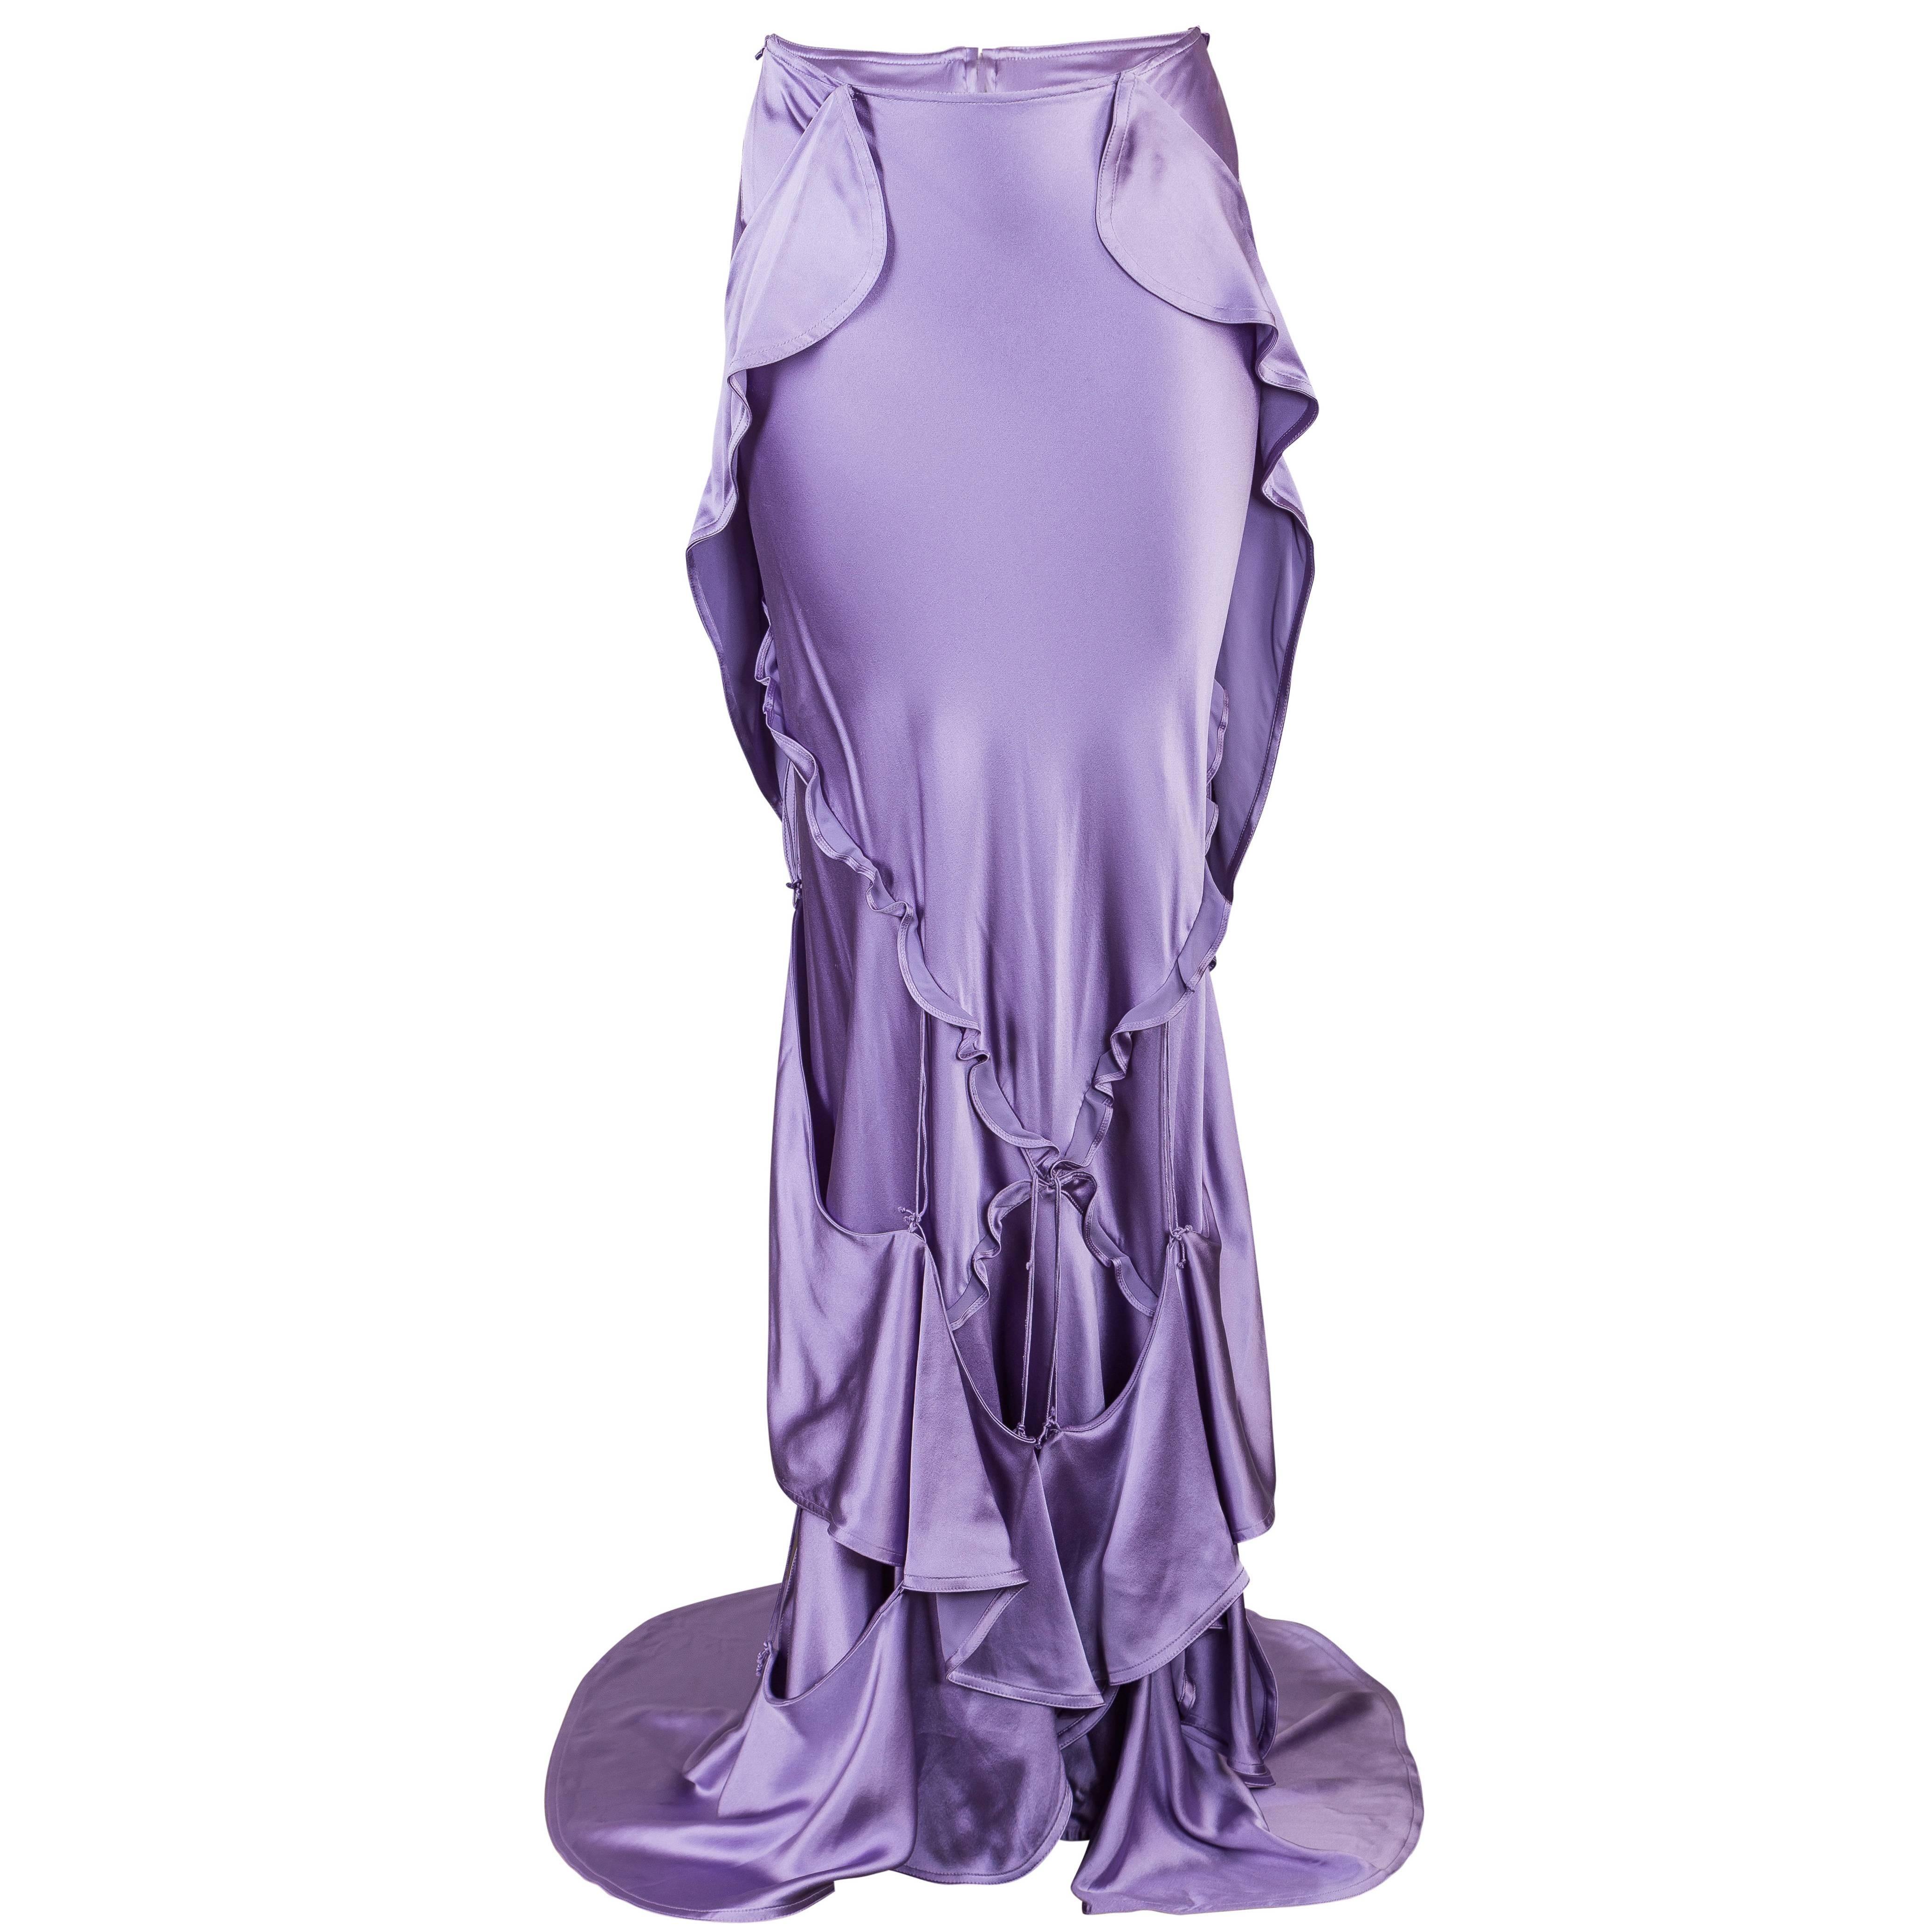 Tom Ford for Yves Saint Laurent Fall 2003 Lilac Silk Evening Skirt For Sale